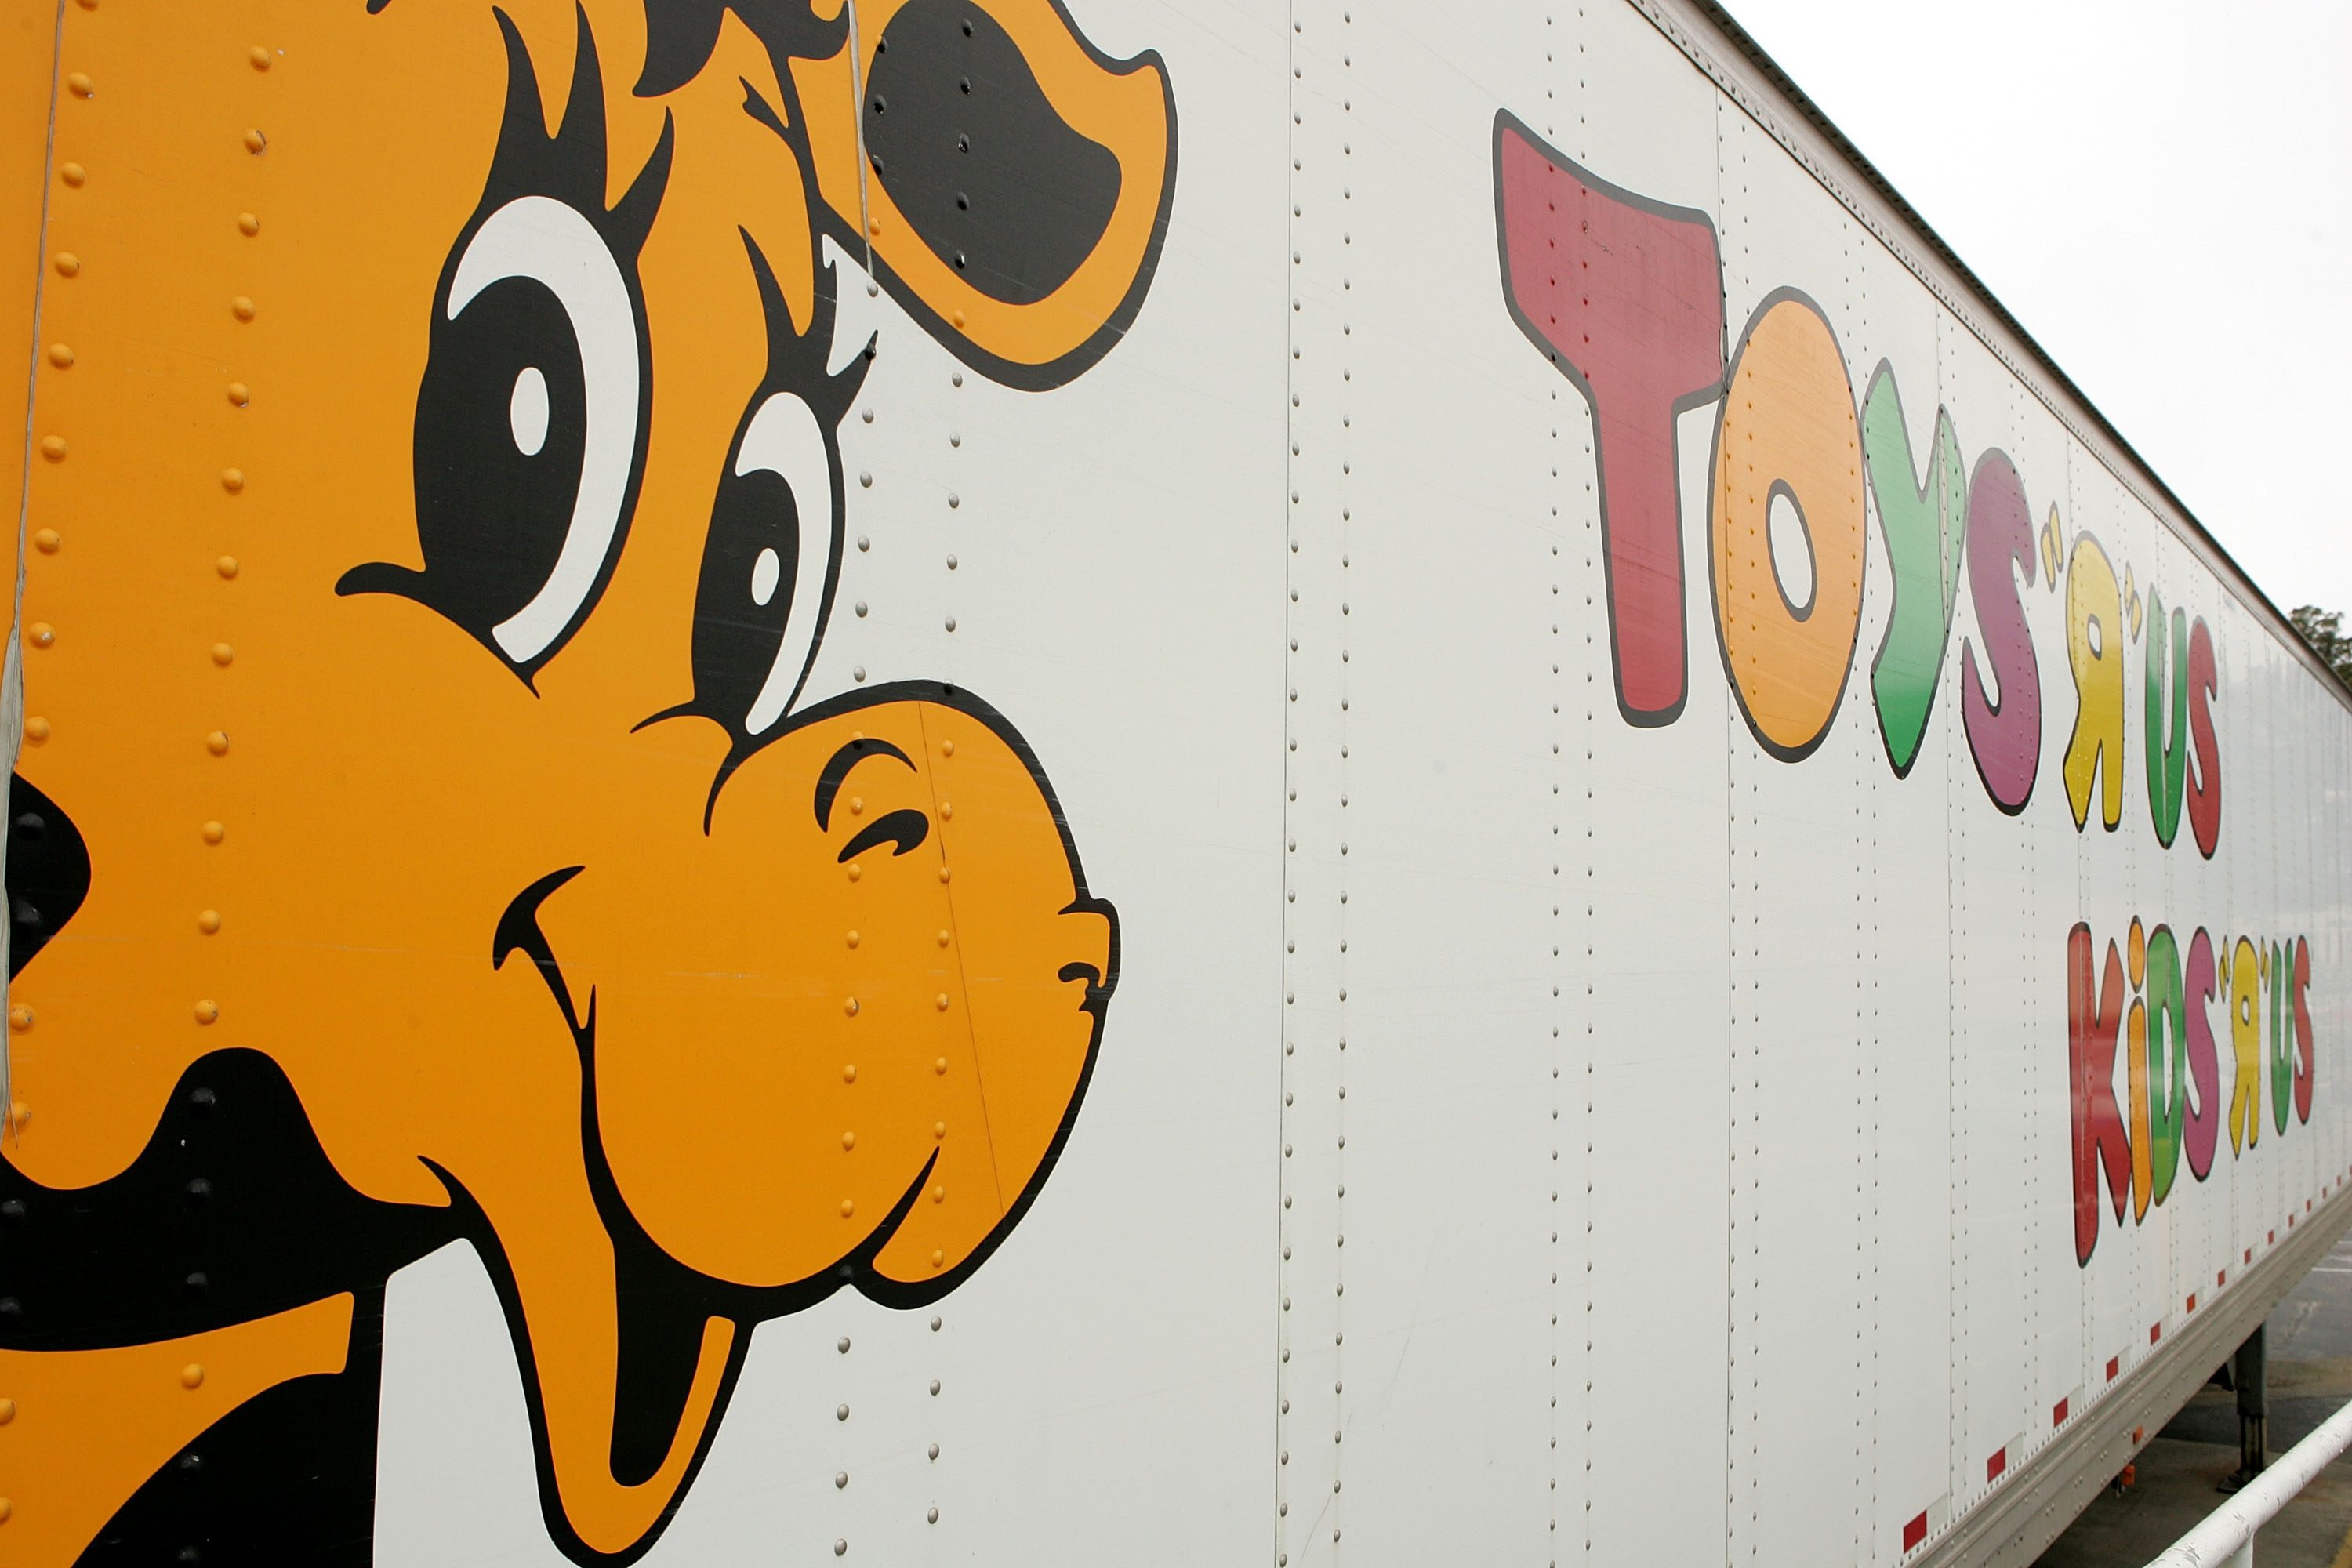 Toys R Us Bankruptcy Auction Canceled; Brand May Survive